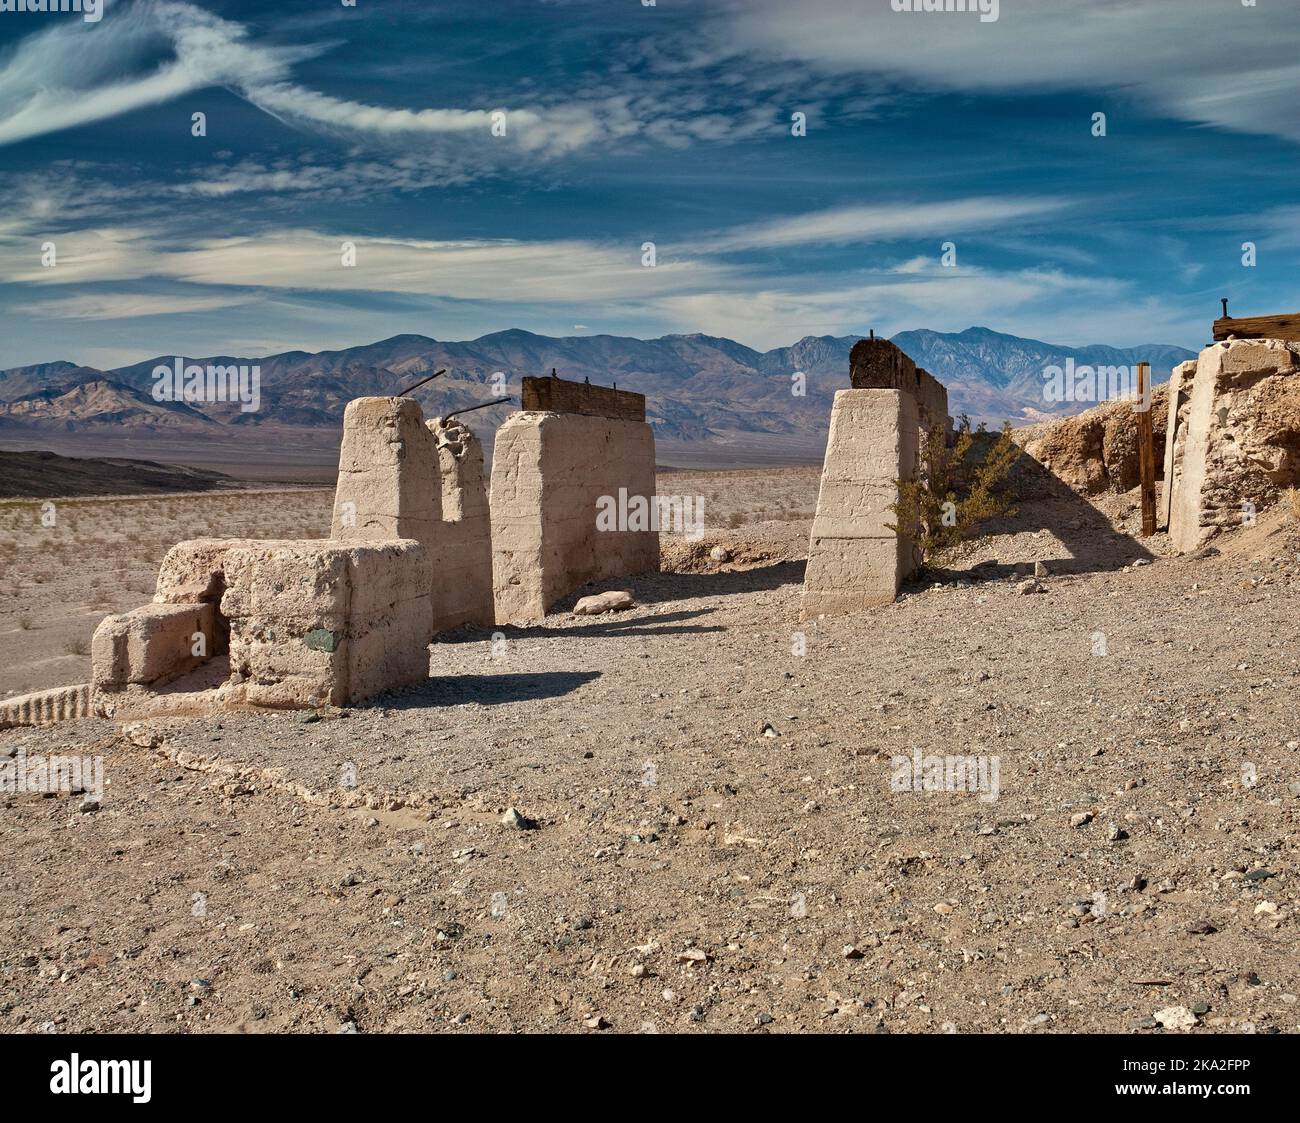 Ashford Mill ruins with Panamint Range in distance, Mojave Desert, Death Valley National Park, California, USA Stock Photo